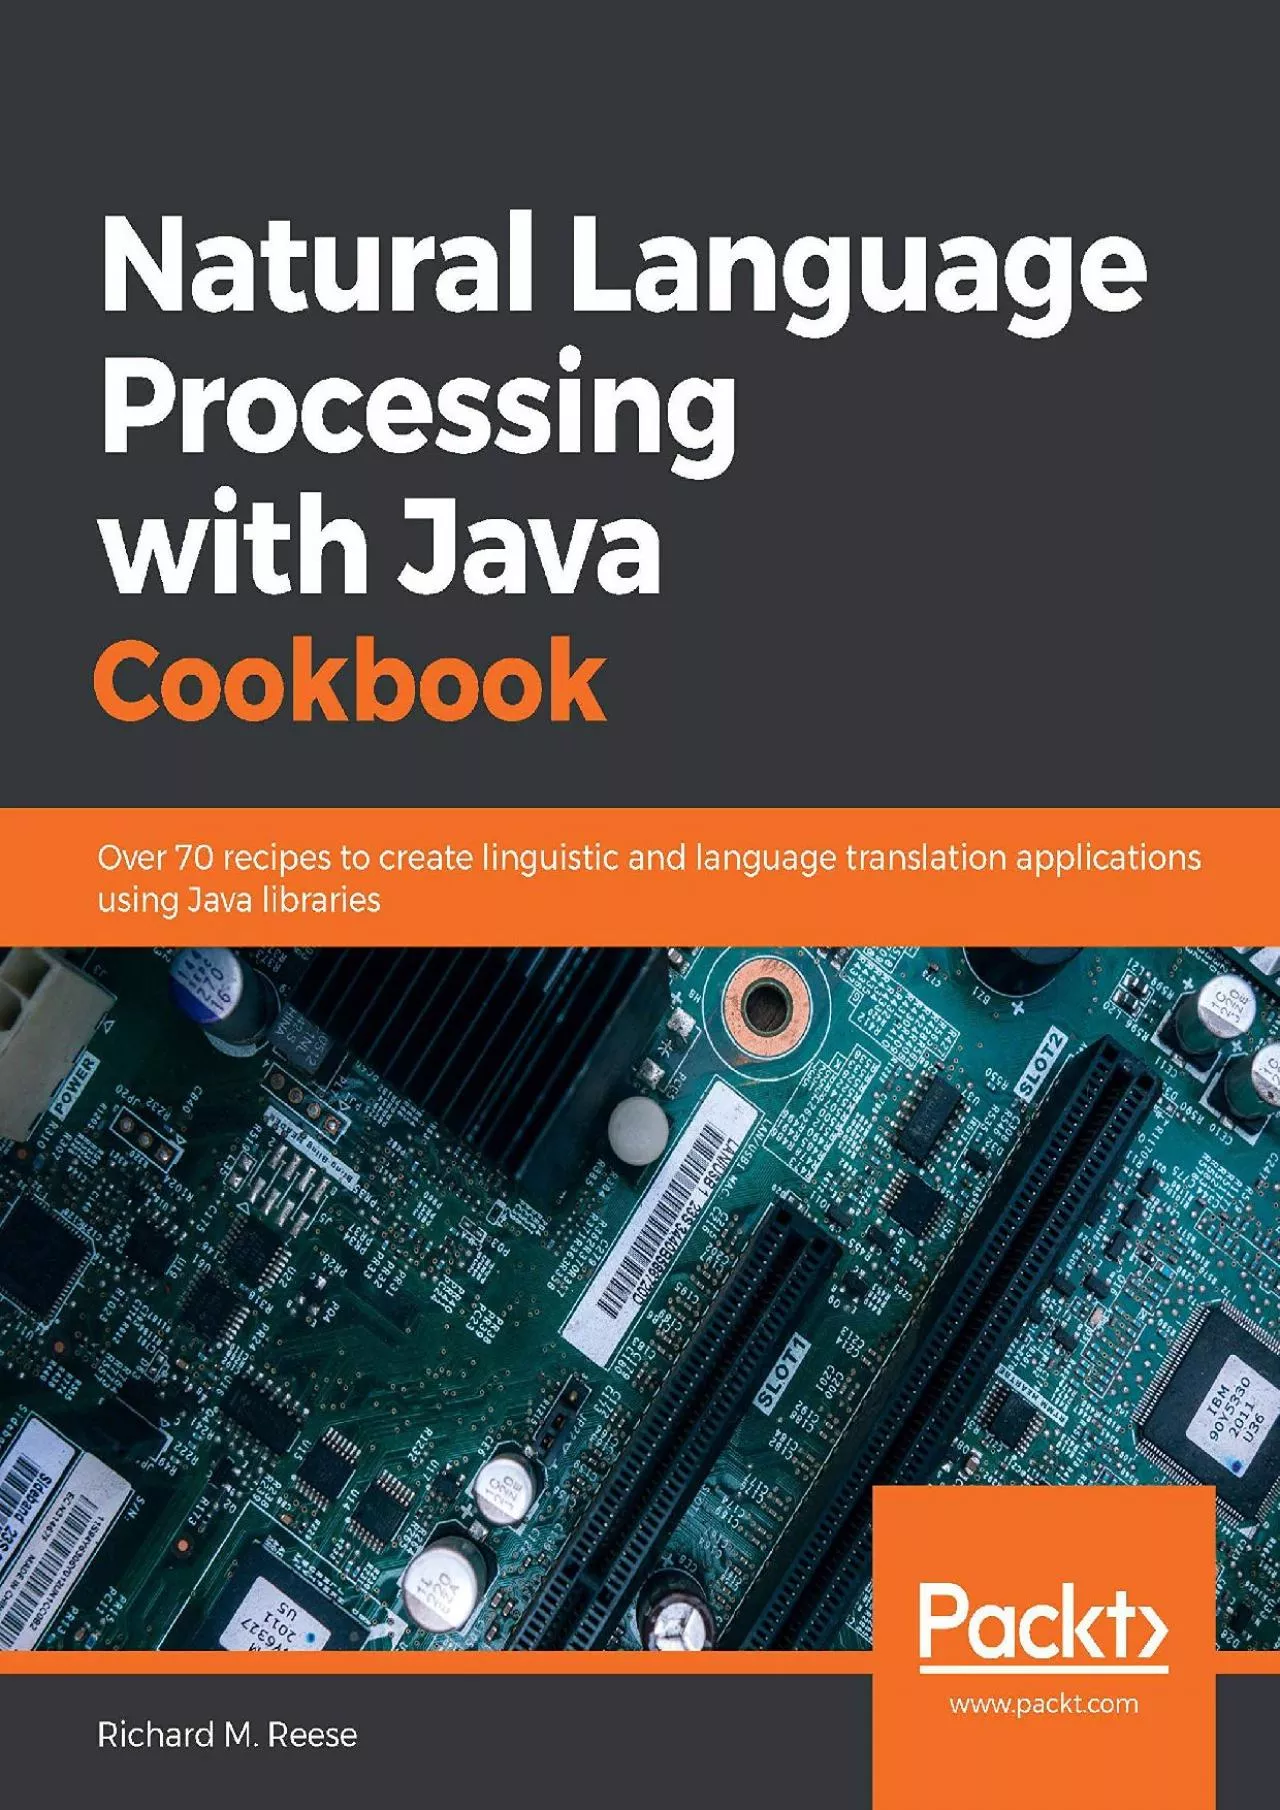 [READING BOOK]-Natural Language Processing with Java Cookbook: Over 70 recipes to create